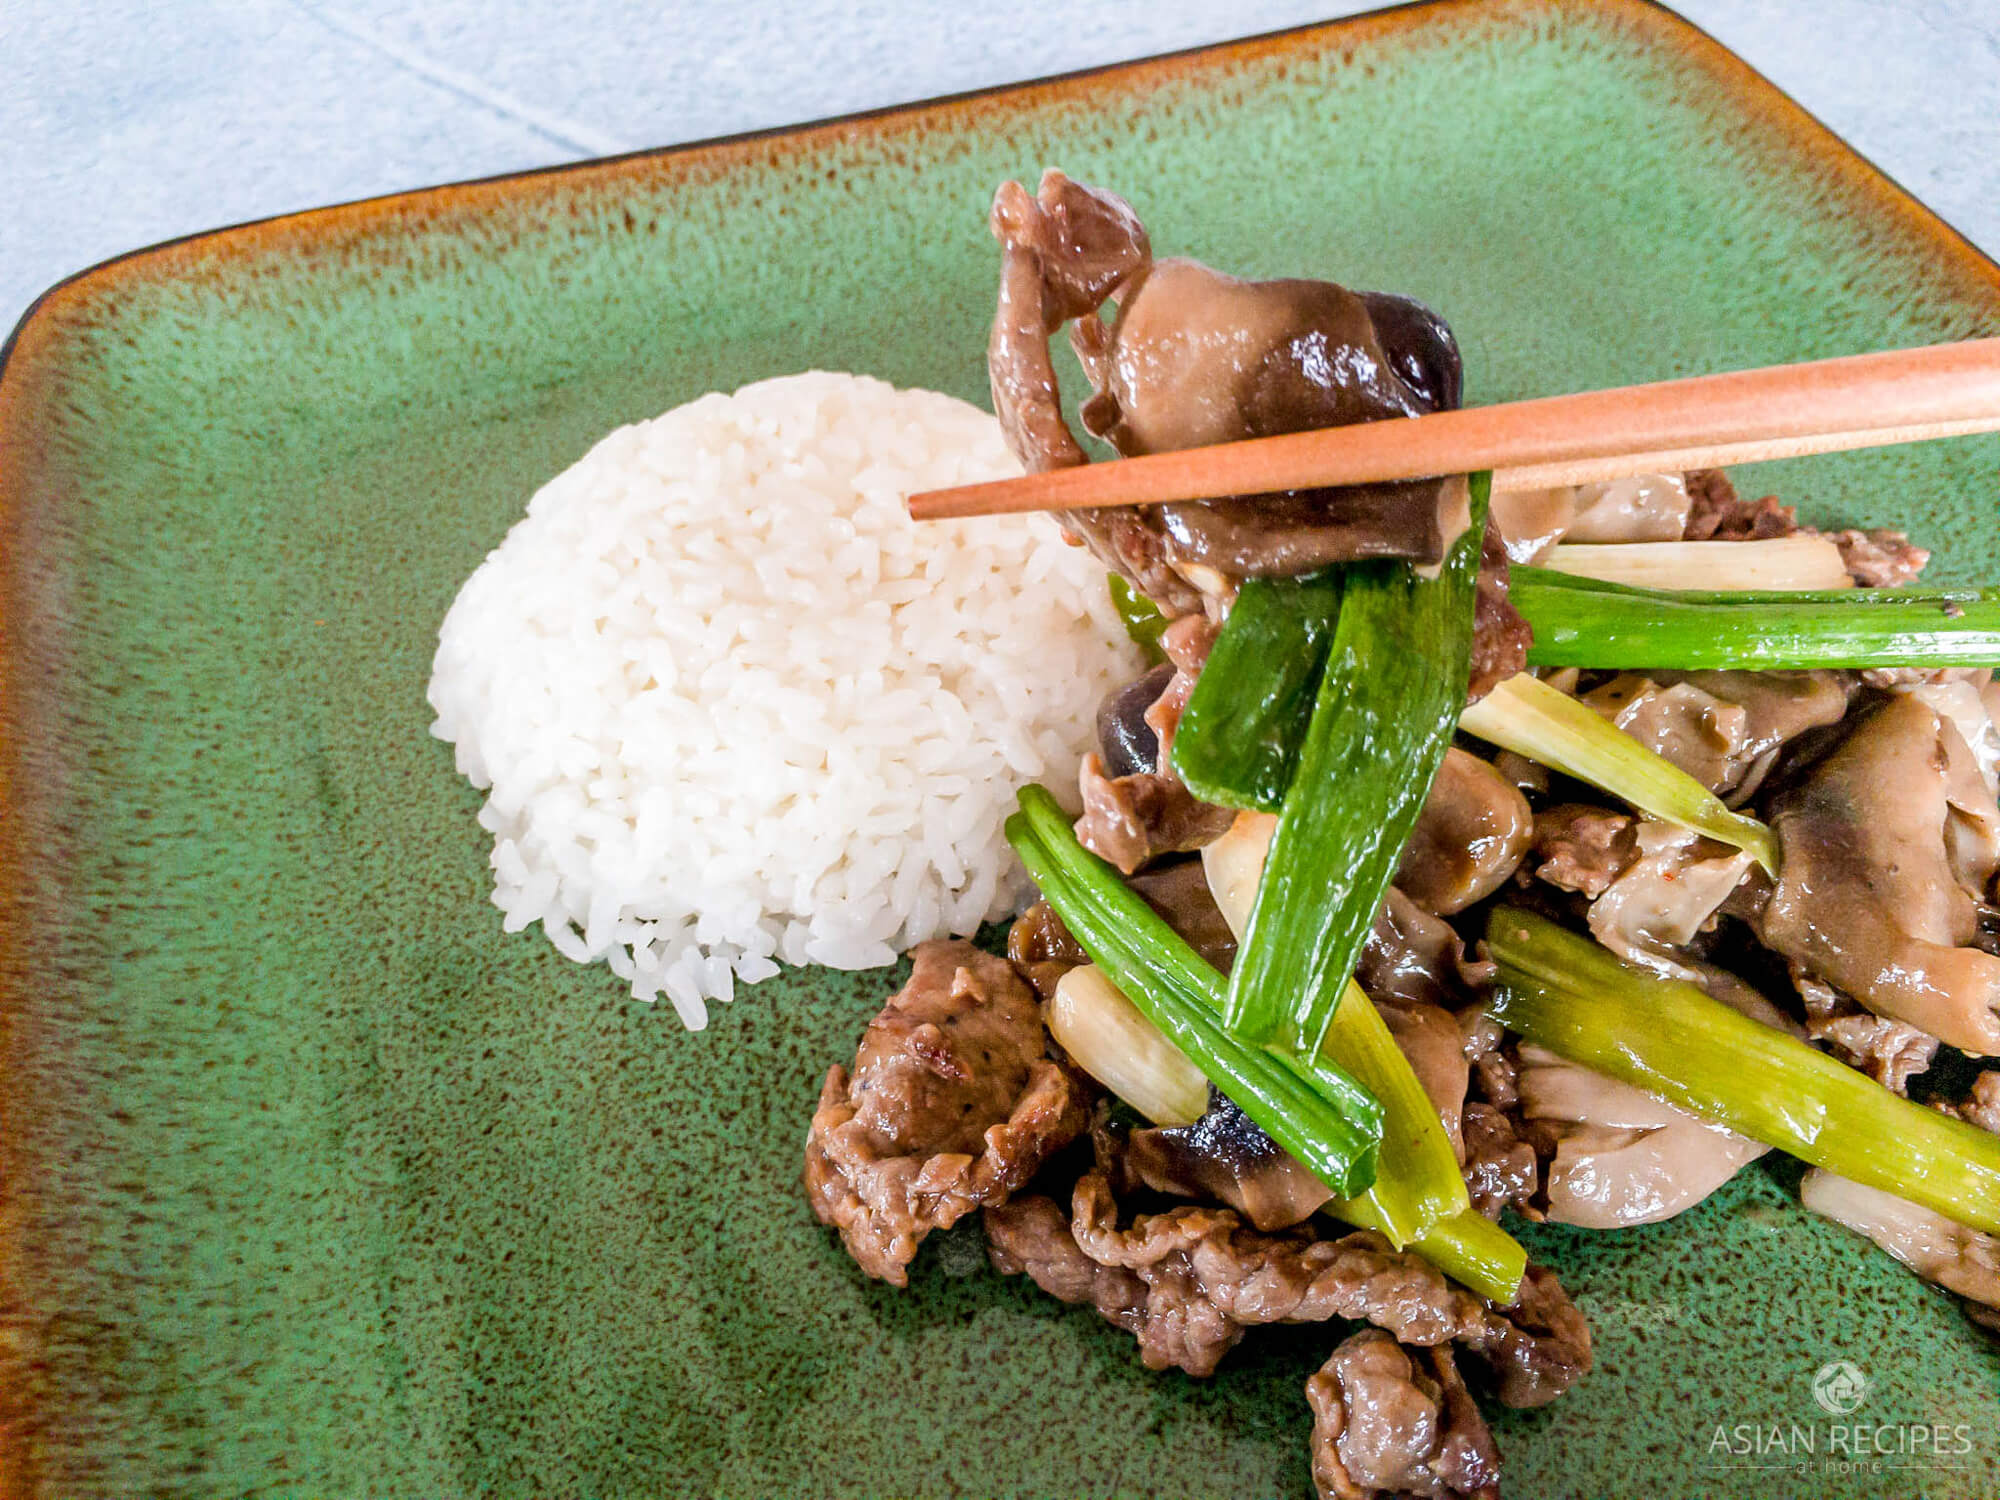 Straw mushrooms and Asian-style marinated beef are stir-fried together in this delicious and easy recipe.